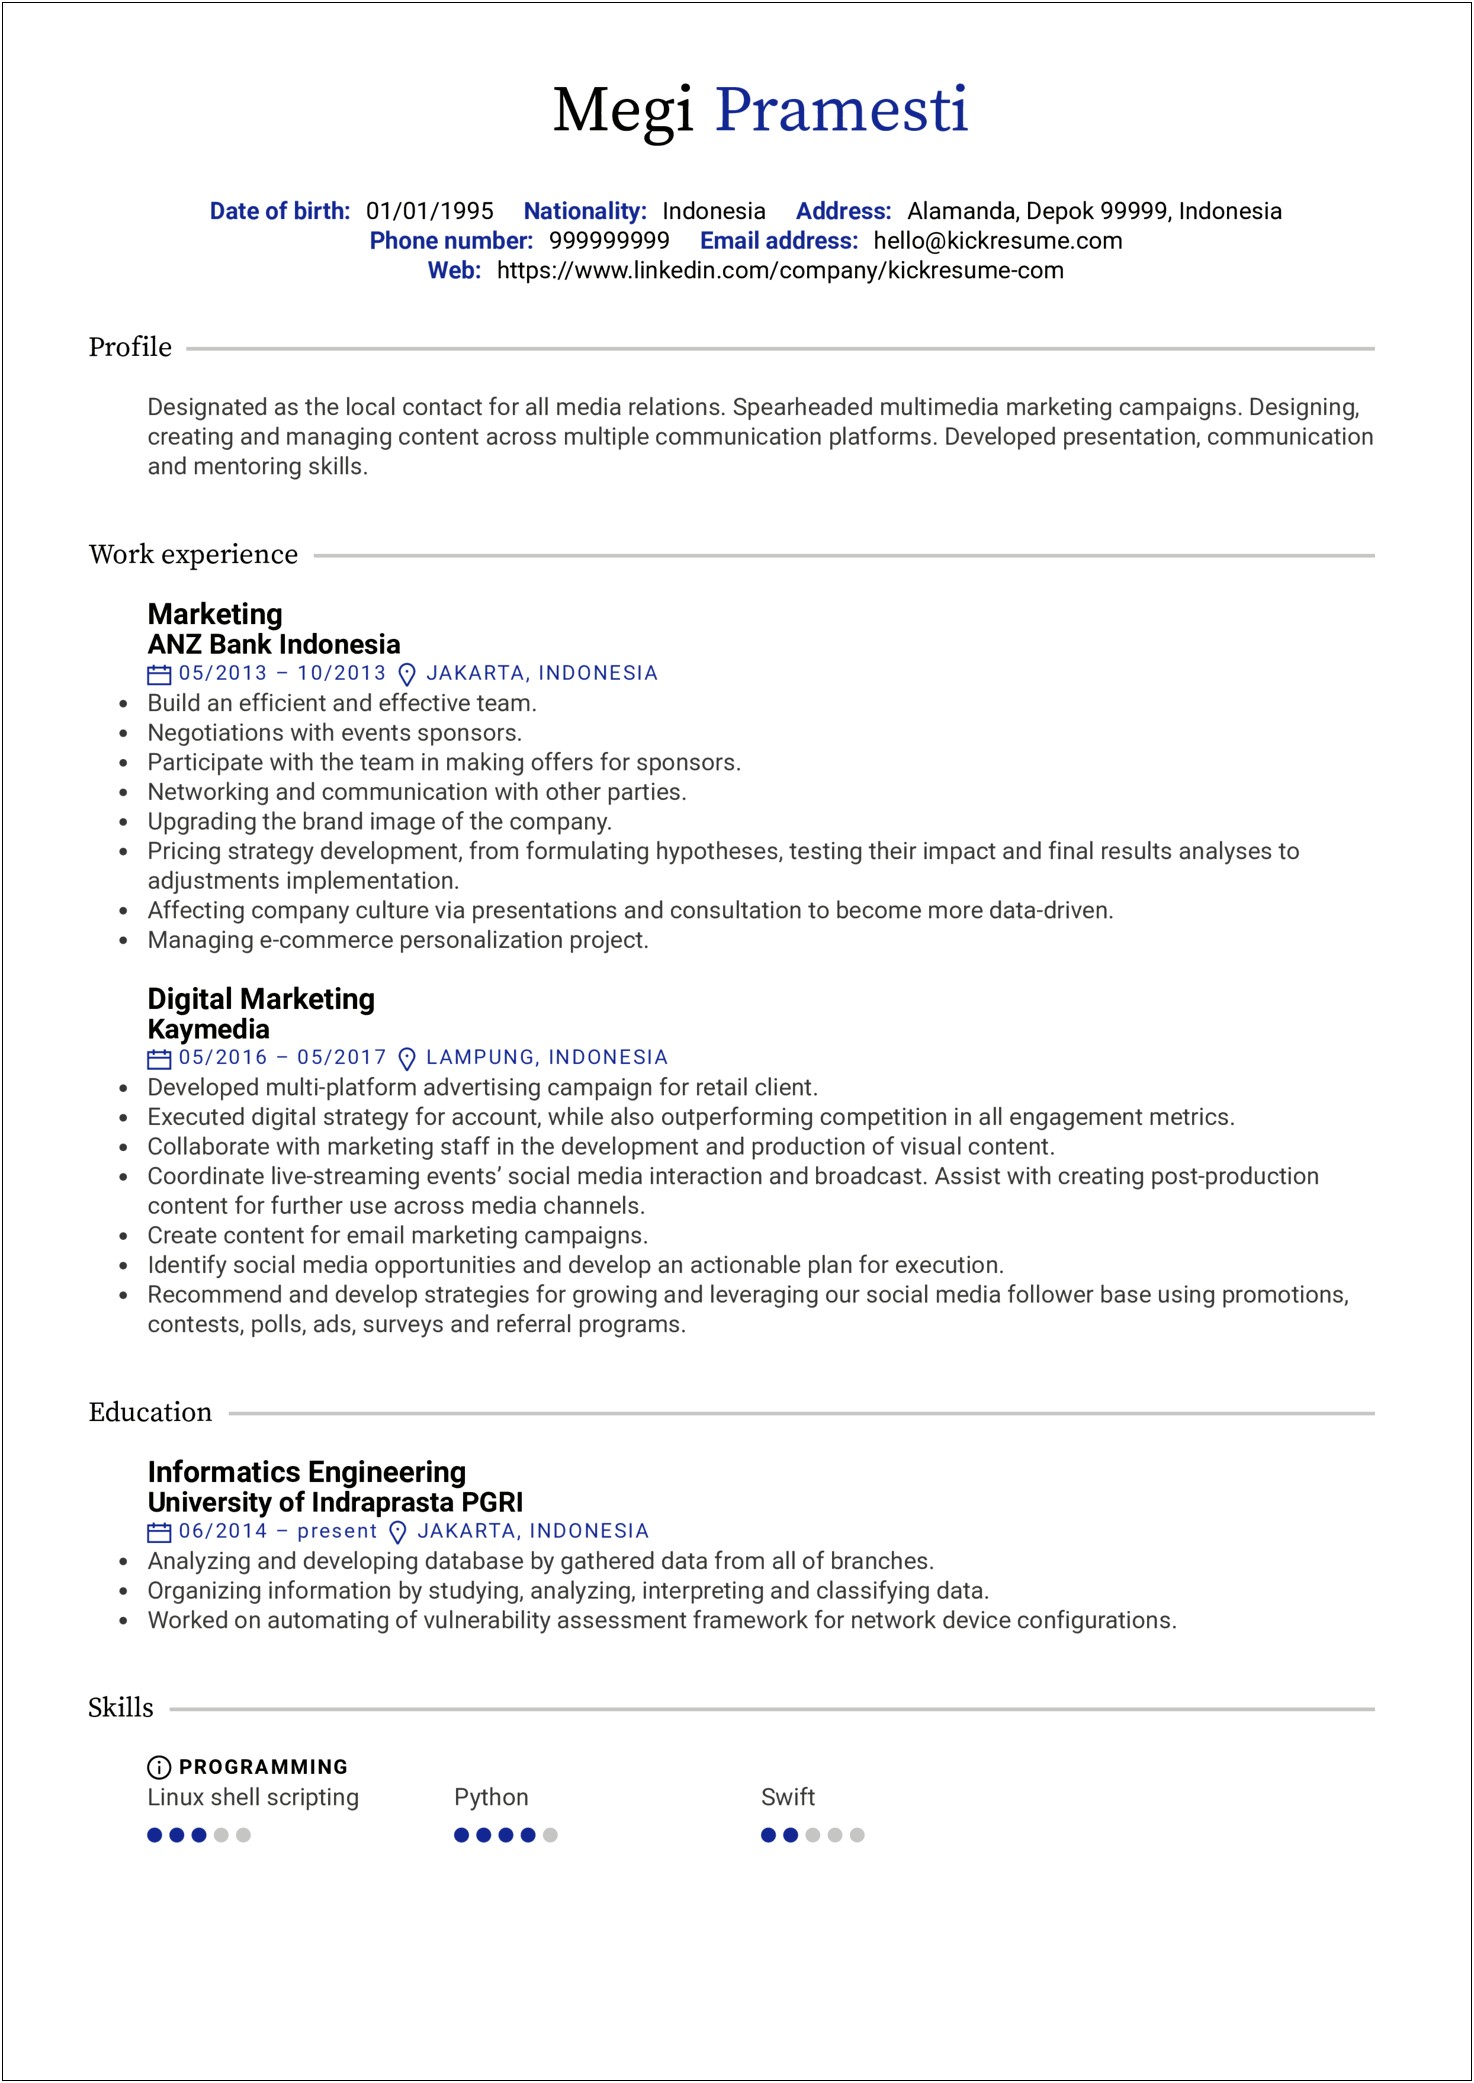 Best Skills For A Marketing Resume